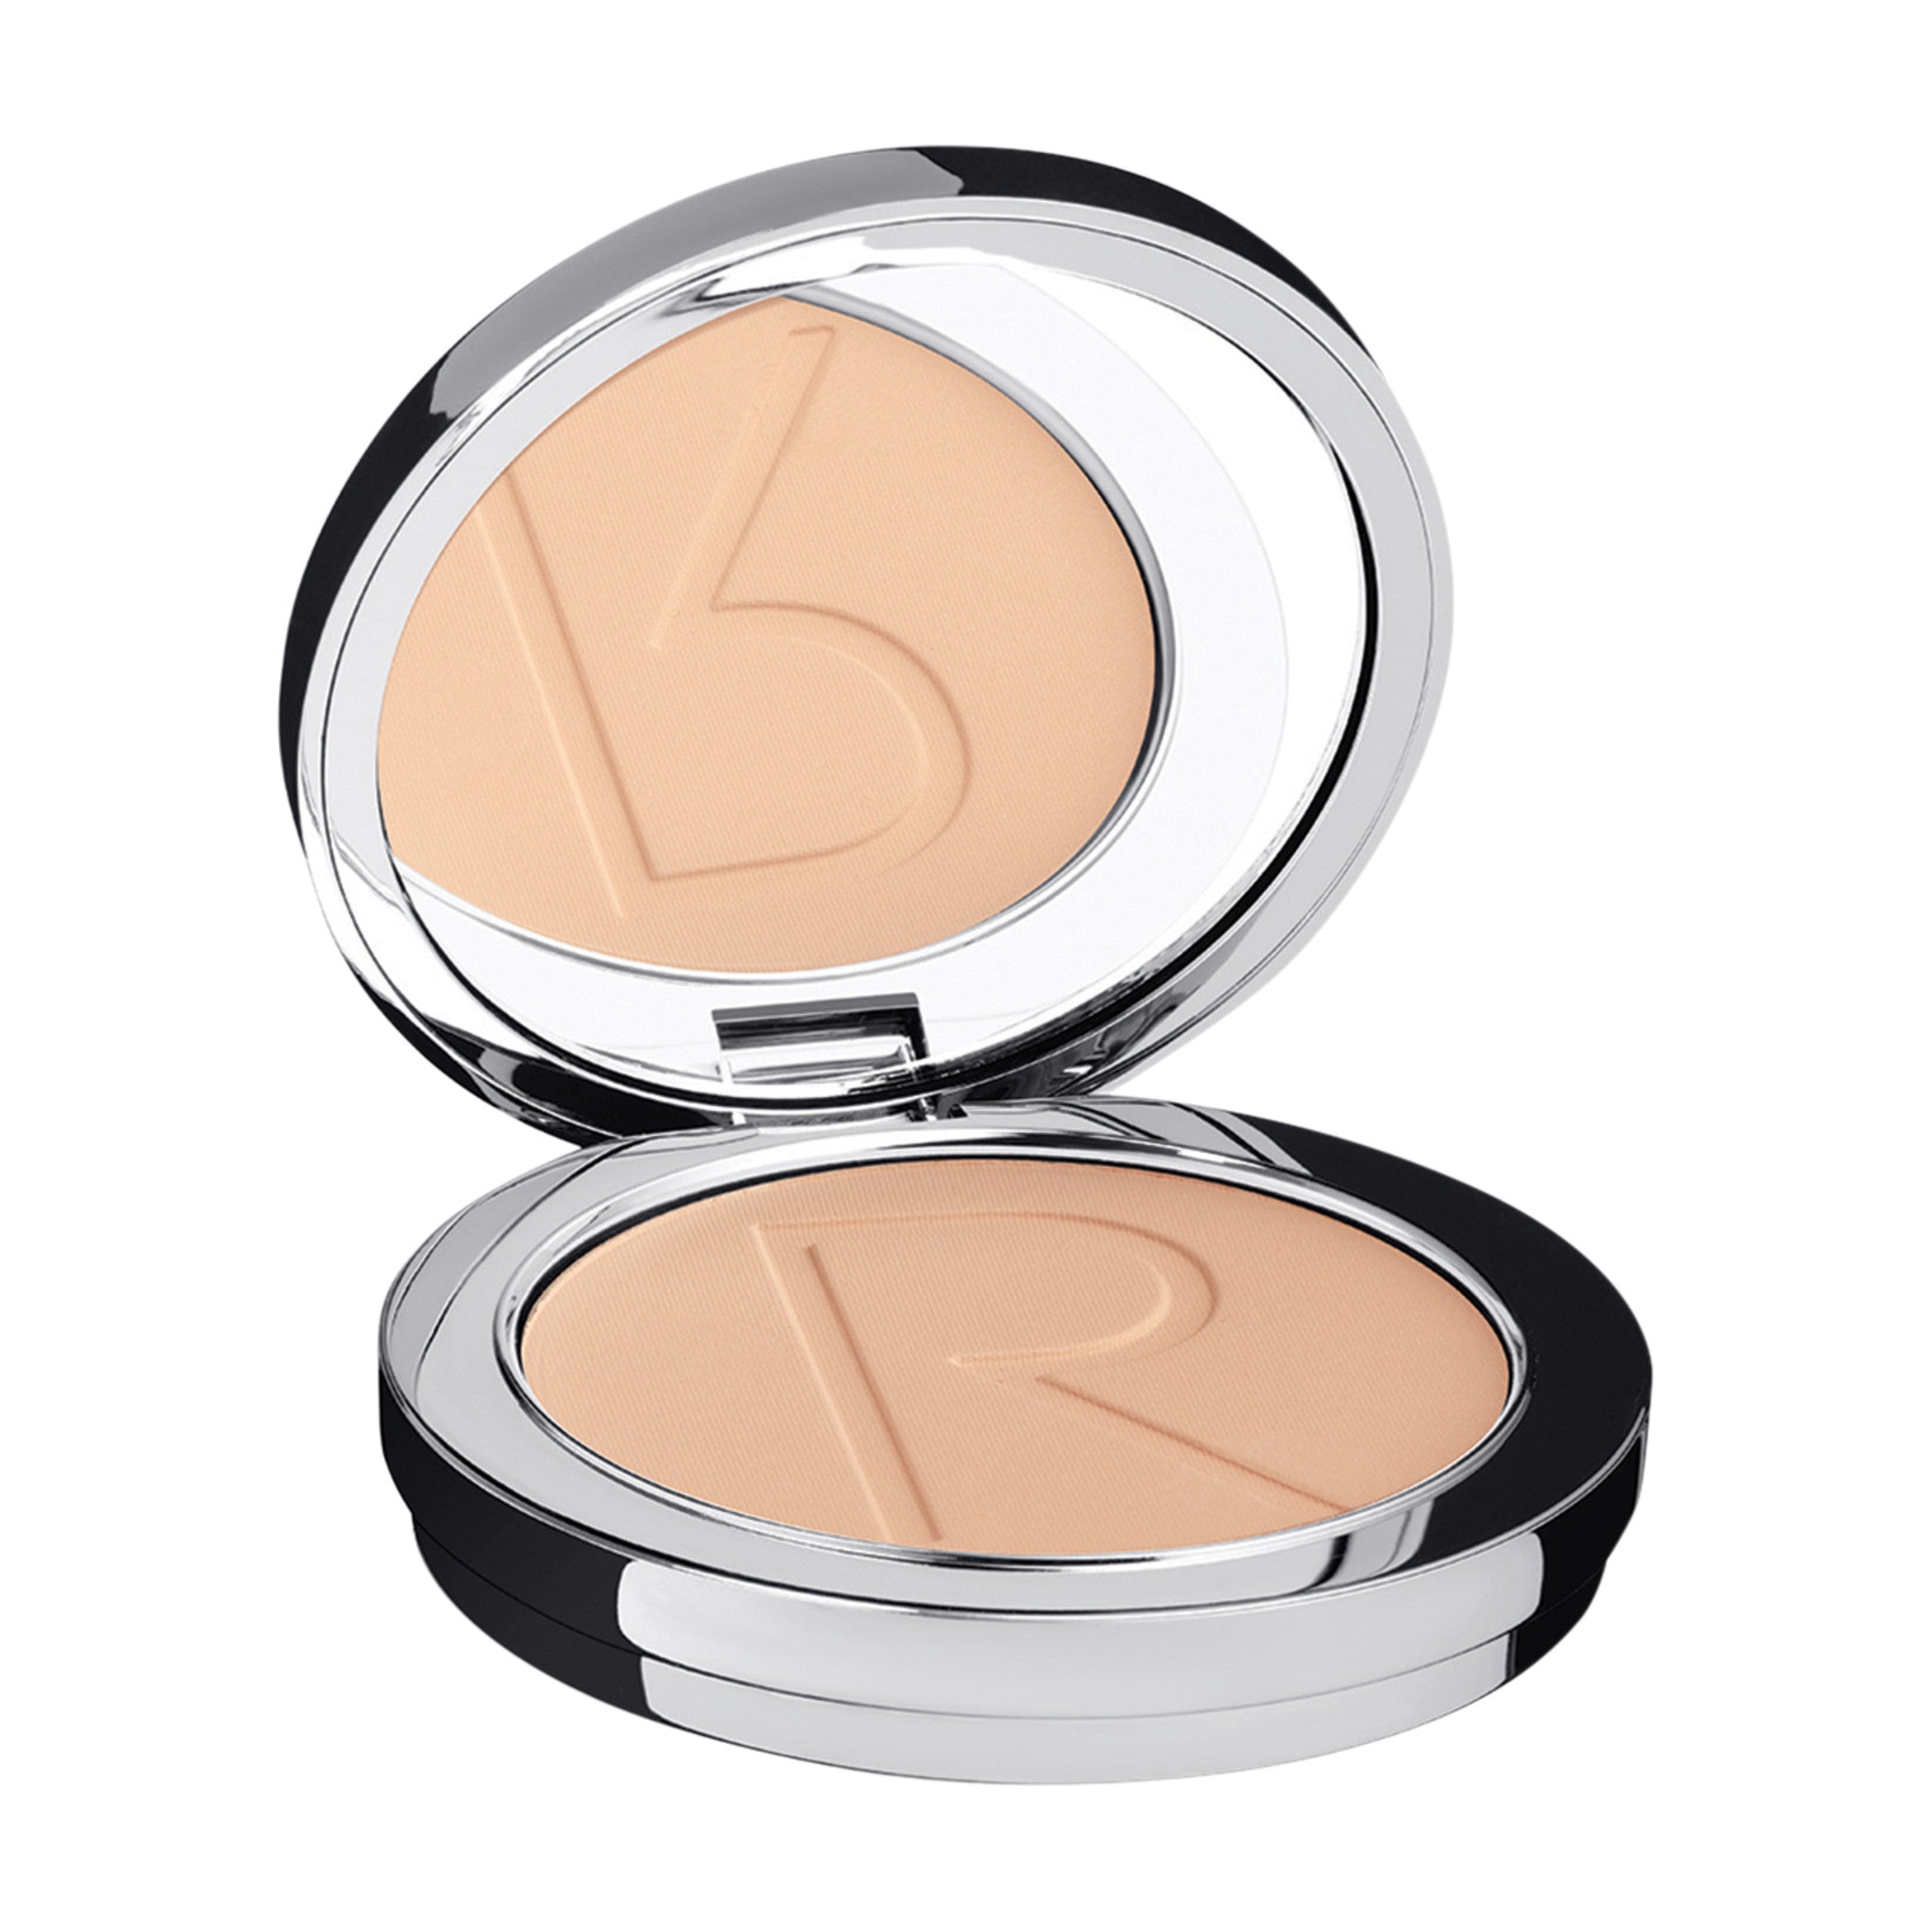 Rodial Peach Powder main image. This product is in the color pink, for light and medium and deep warm peach complexions